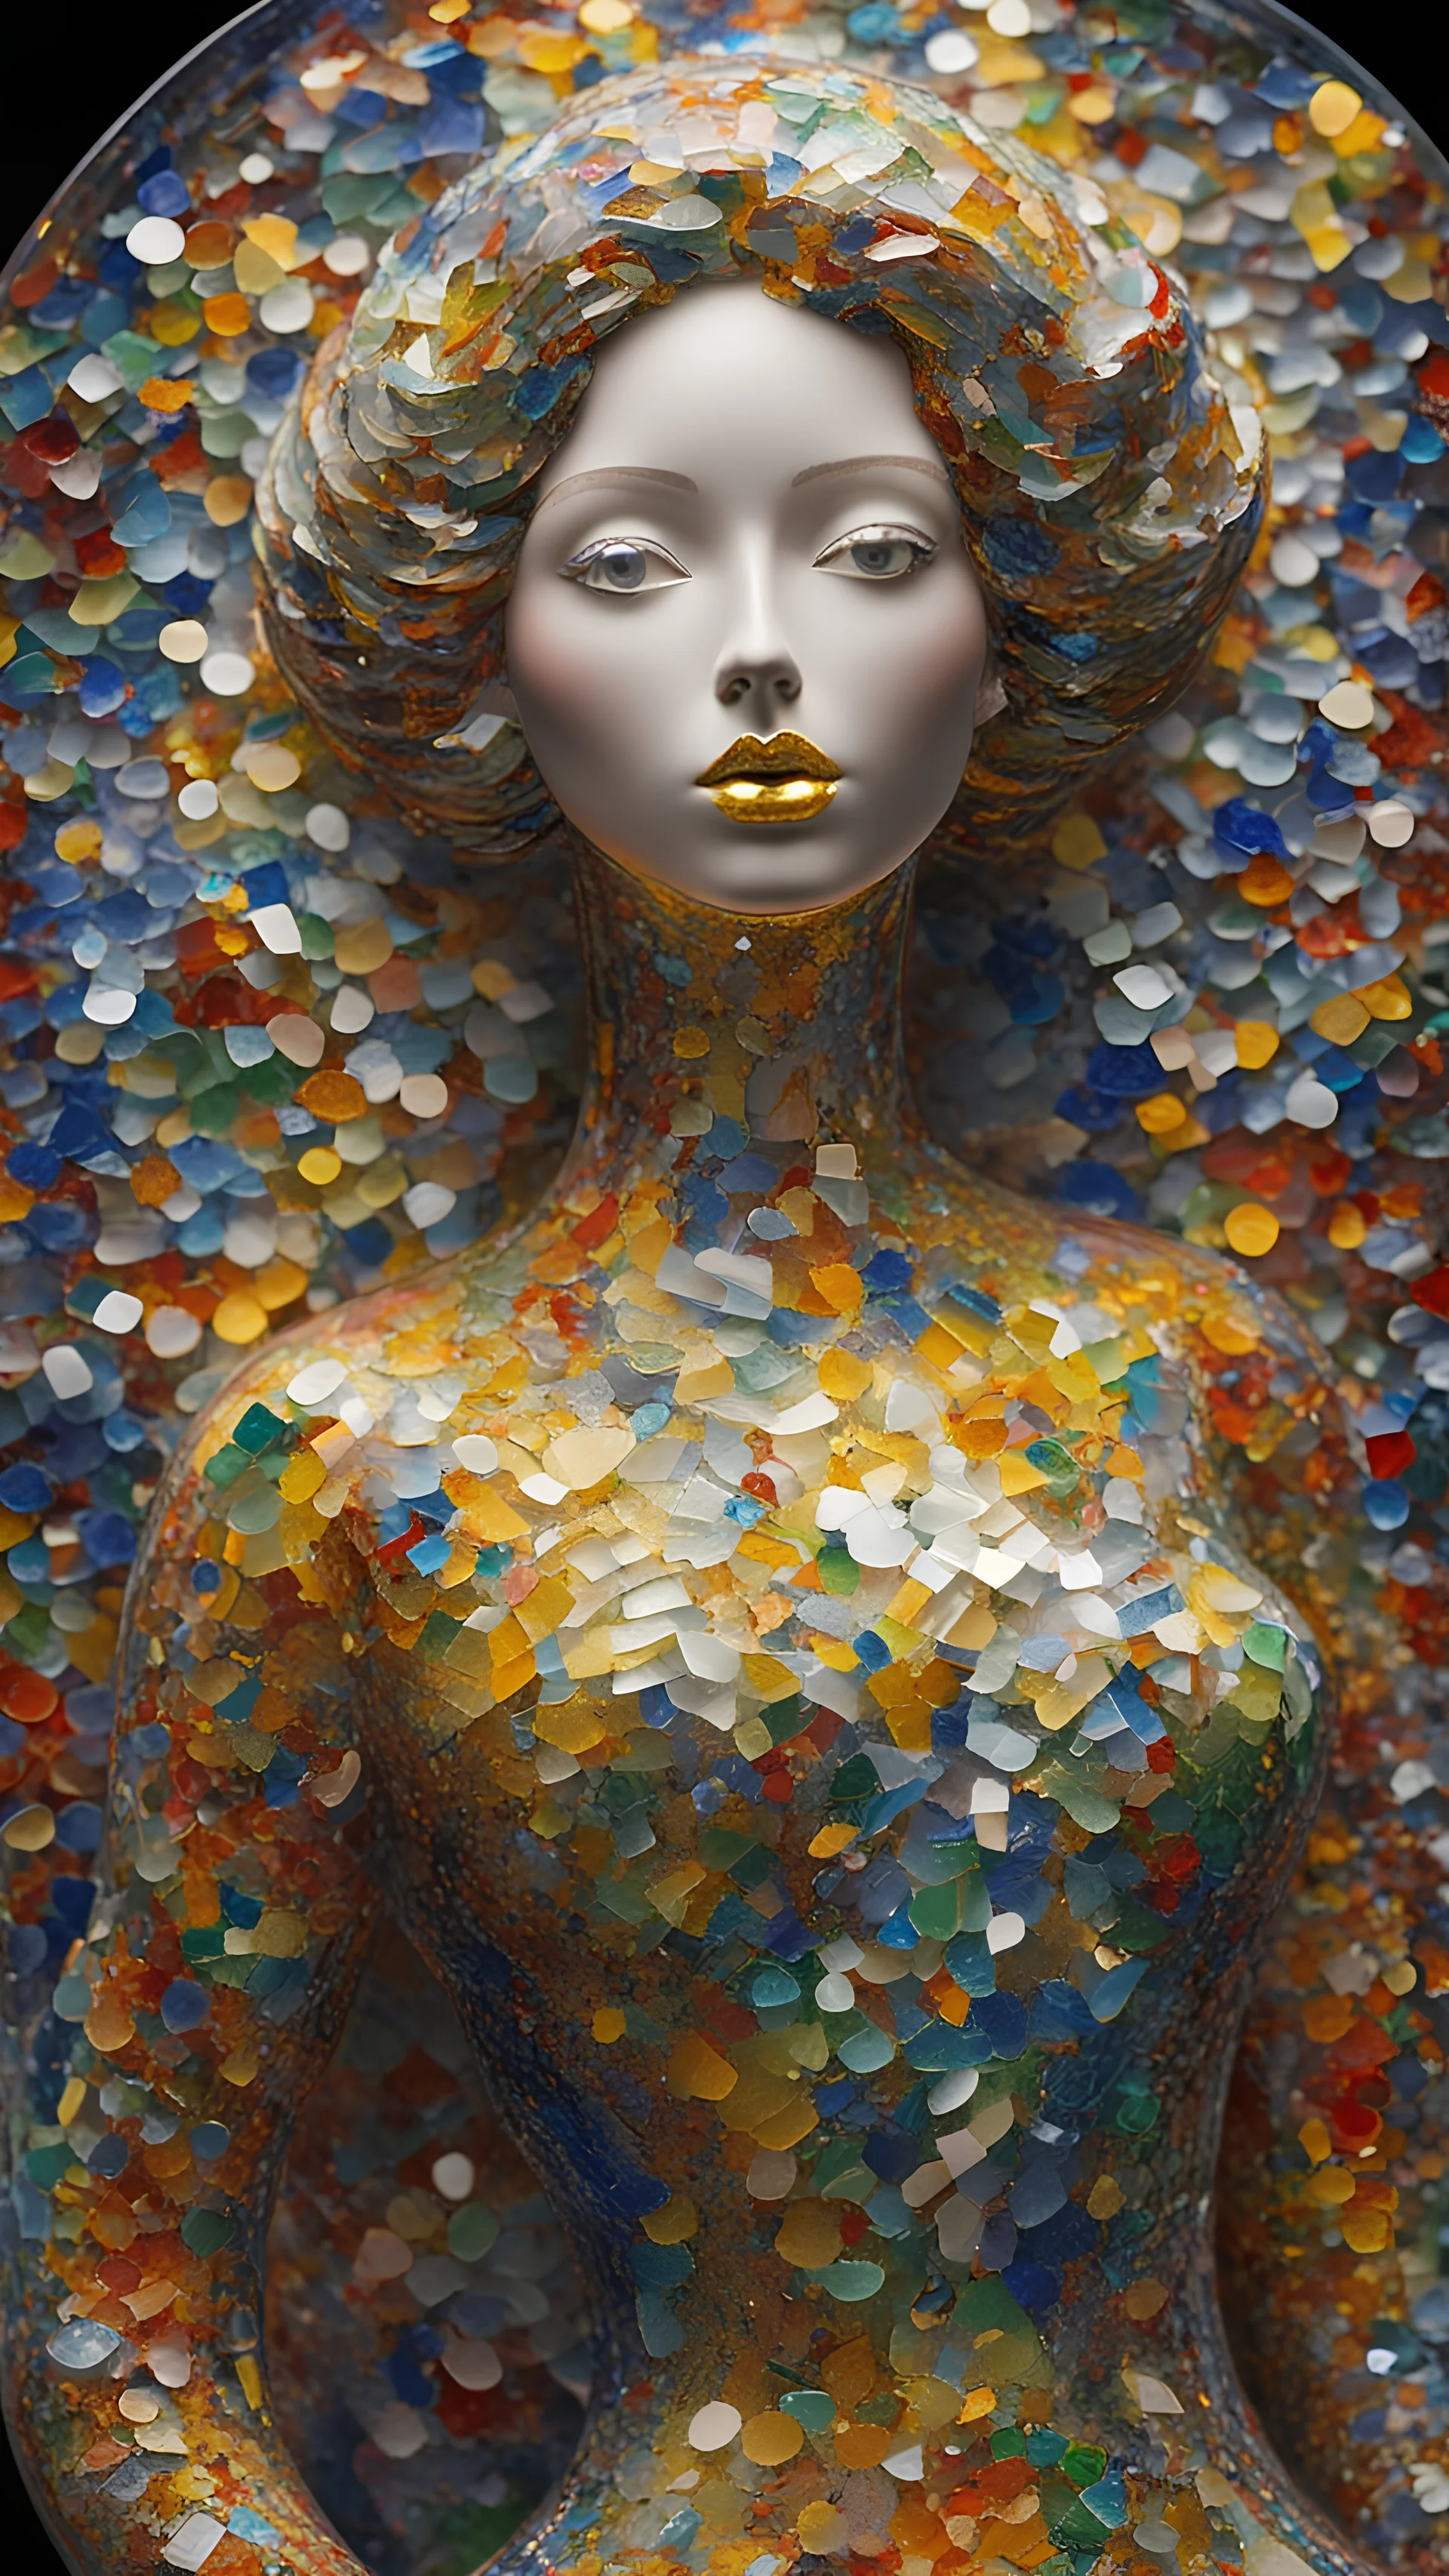 A mesmerizing work of art featuring a female figure skillfully crafted from Murano glass confetti. The woman is adorned with a kaleidoscope of colors, including vibrant shades of yellow, blue, red, and green. Each color seems to form a mosaic-like pattern, creating a harmonious and visually striking design. The meticulous attention to detail in the glasswork is evident, with each tiny piece of confetti carefully placed to showcase the beauty of the material. The woman stands proudly against a pl